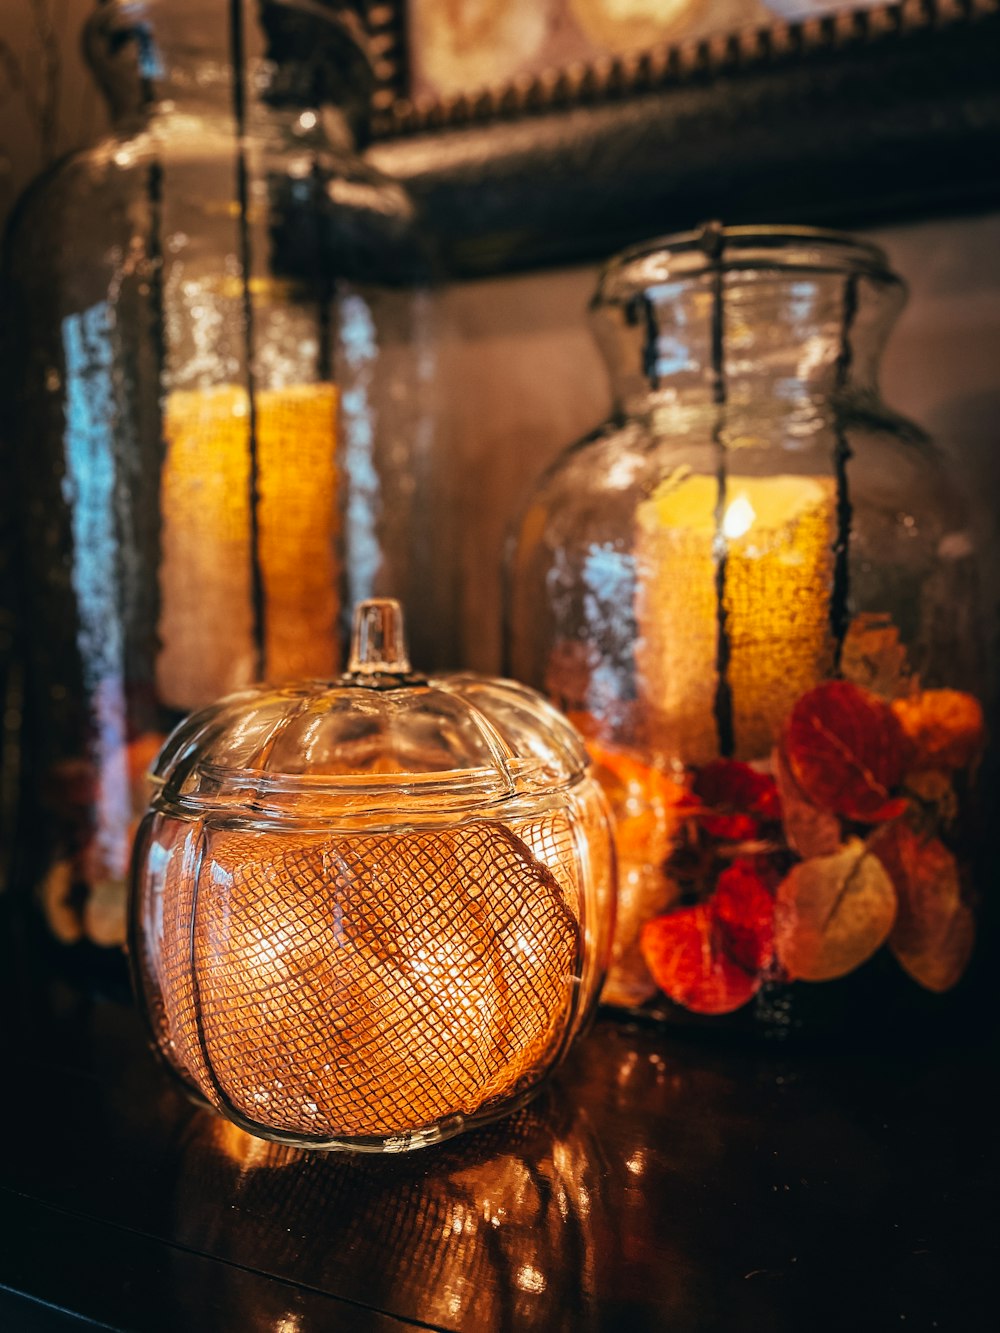 a glass jar with a yellow liquid